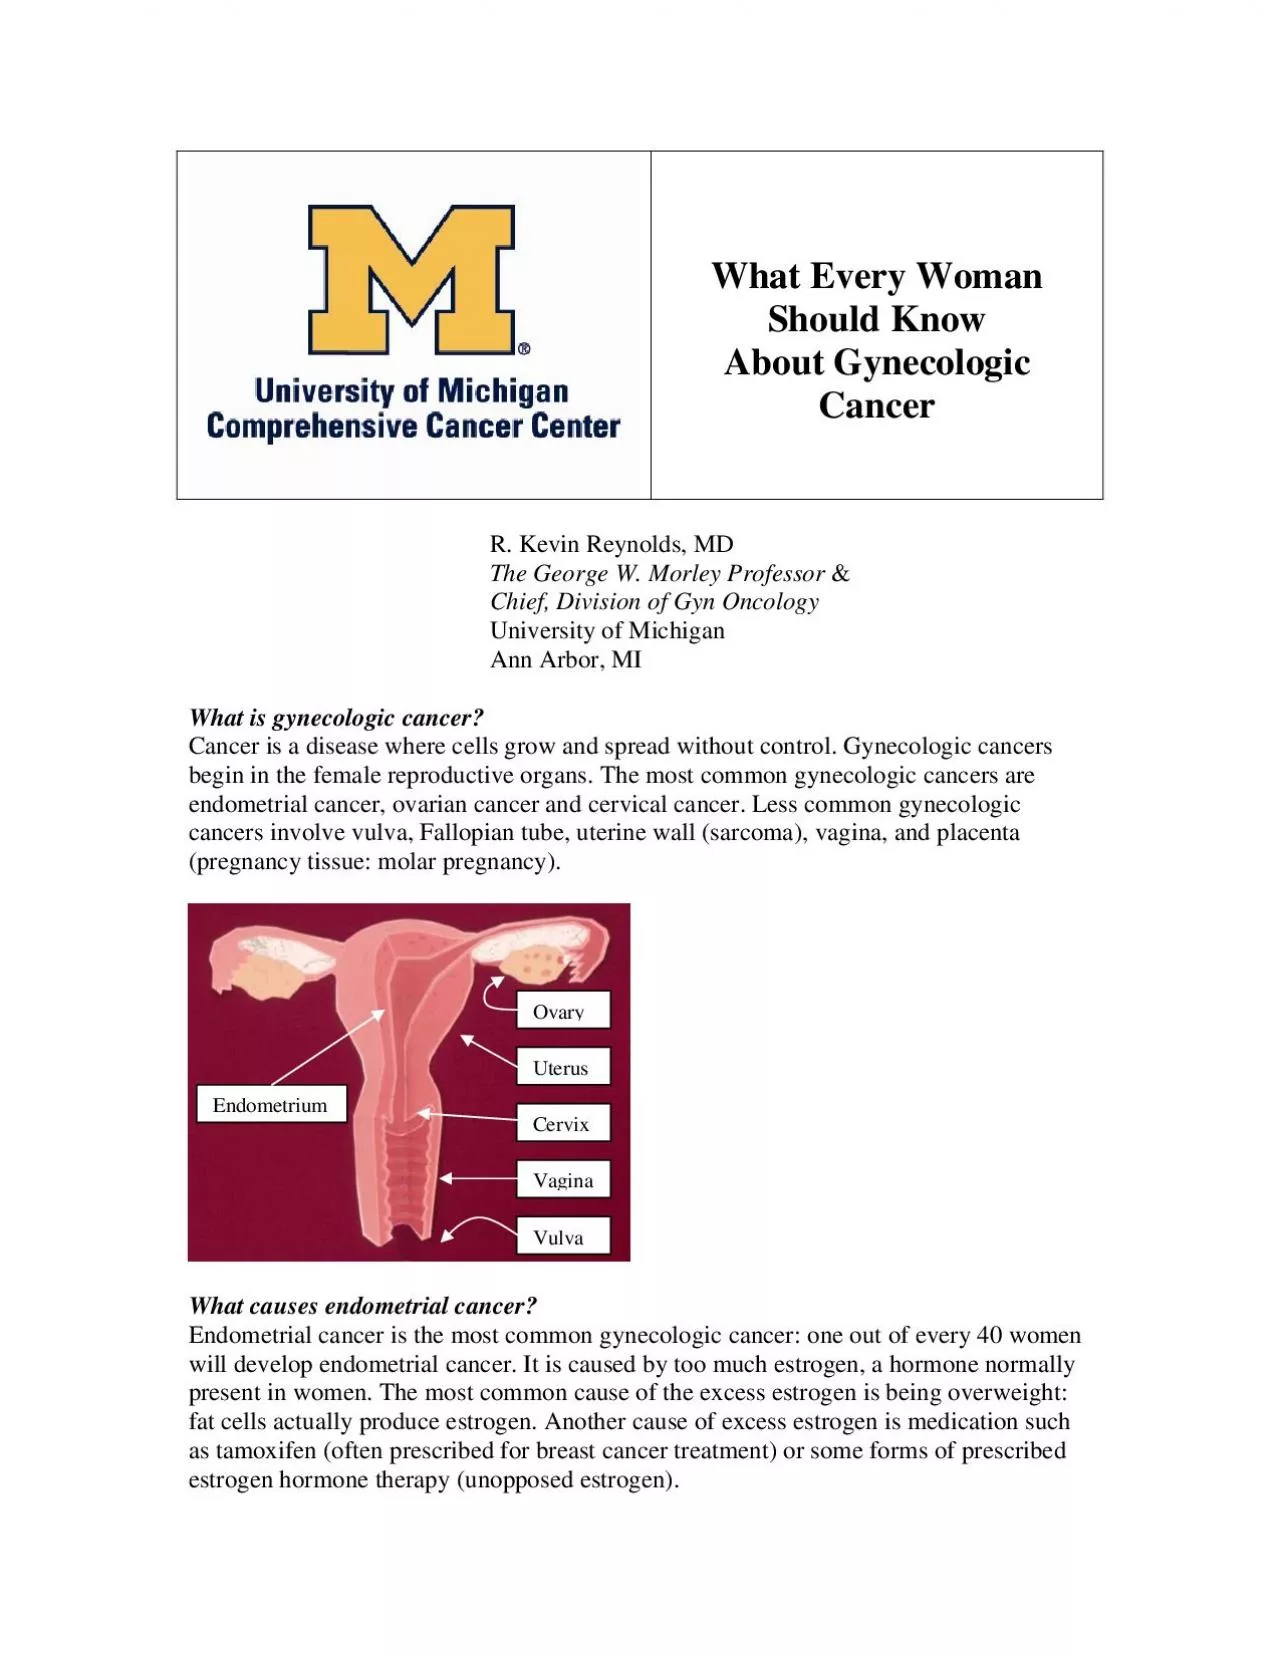 What Every Woman Should Know About Gynecologic Cancer